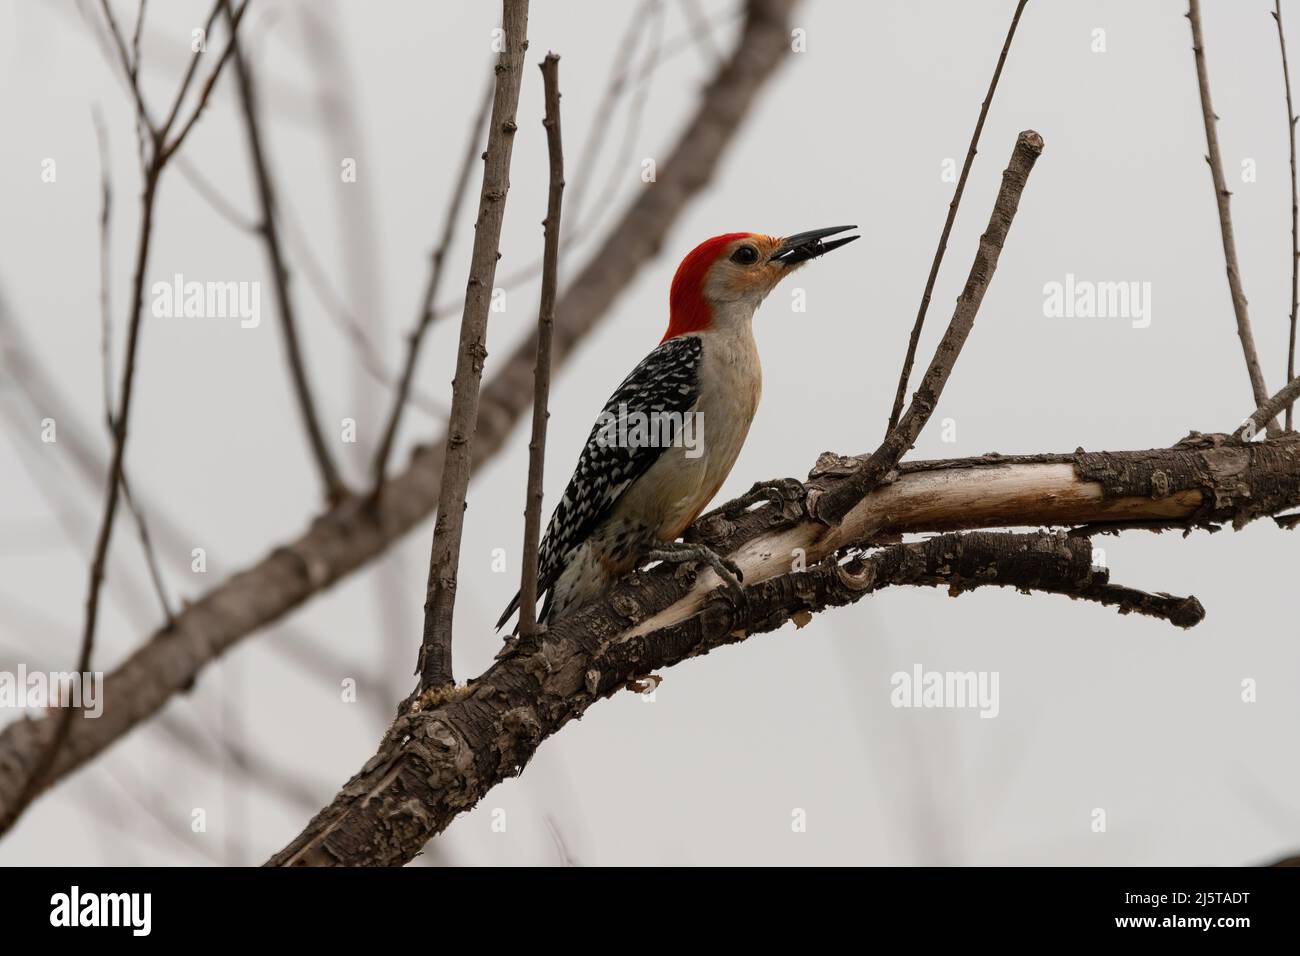 A male Red-bellied Woodpecker perched a tree branch with an insect in its beak that it found in the tree bark that's peeling from the branch. Stock Photo